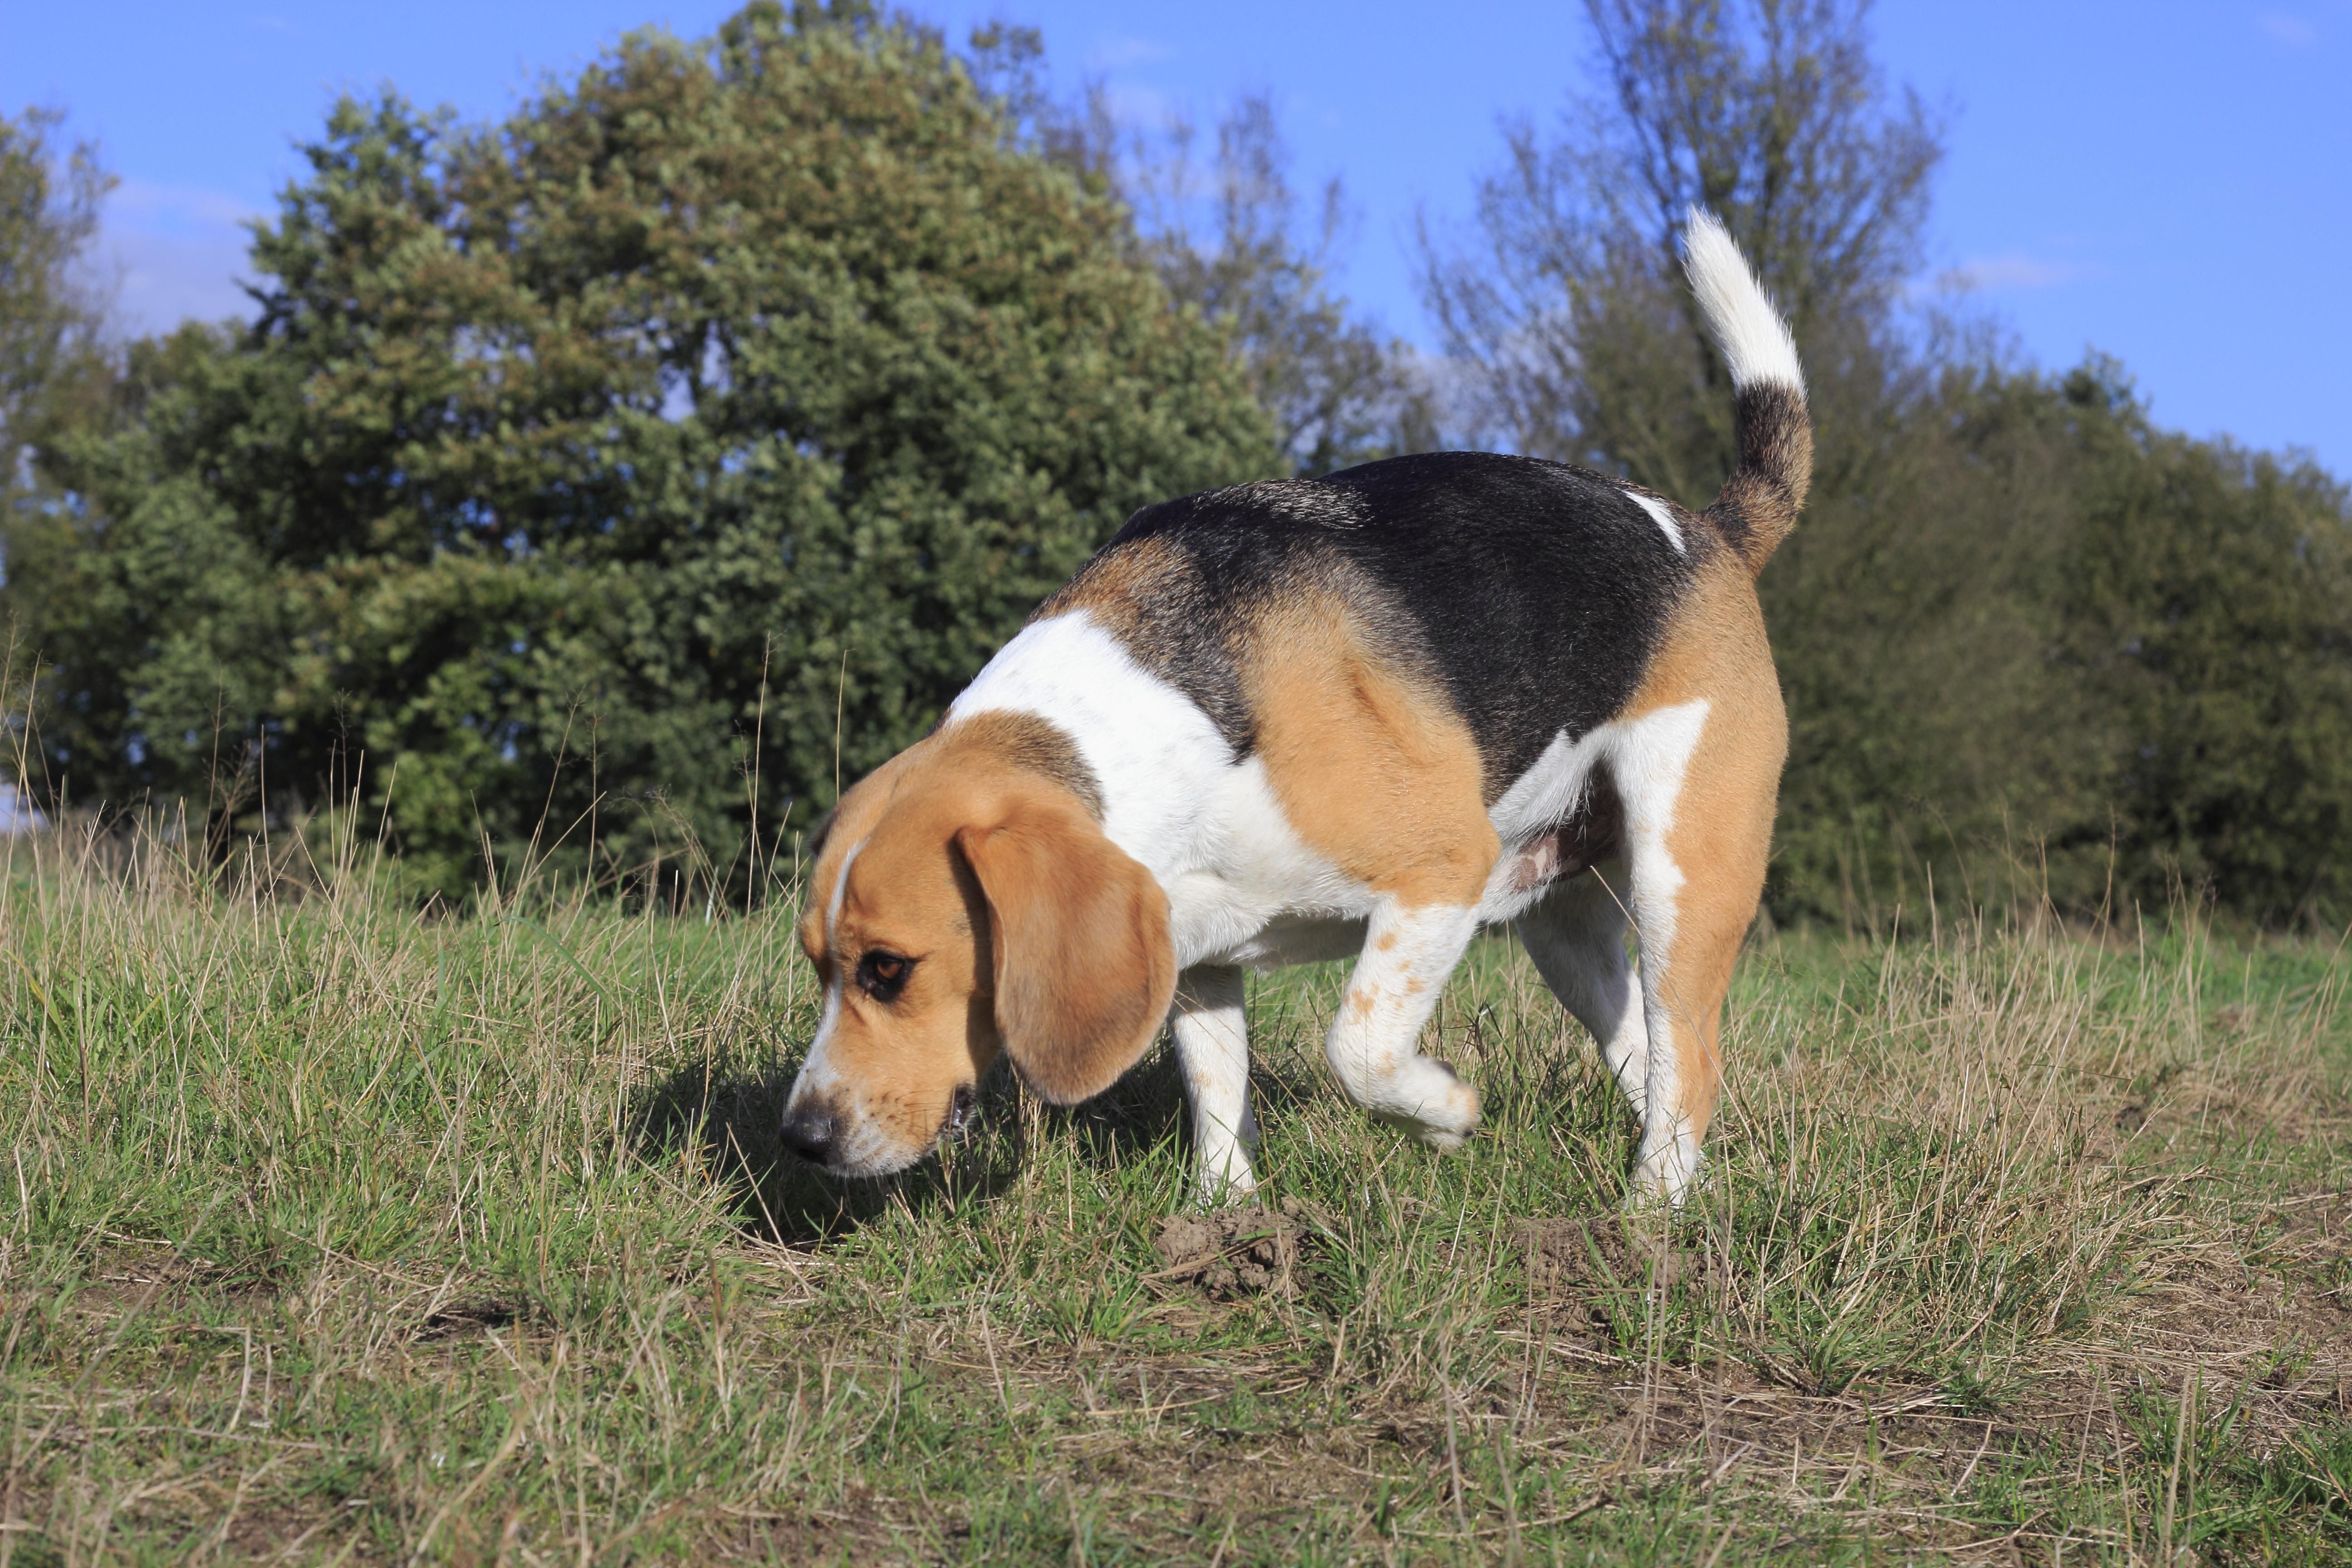 Beagle, 3 years, running across the meadow and sniffing, North Rhine-Westphalia, Germany